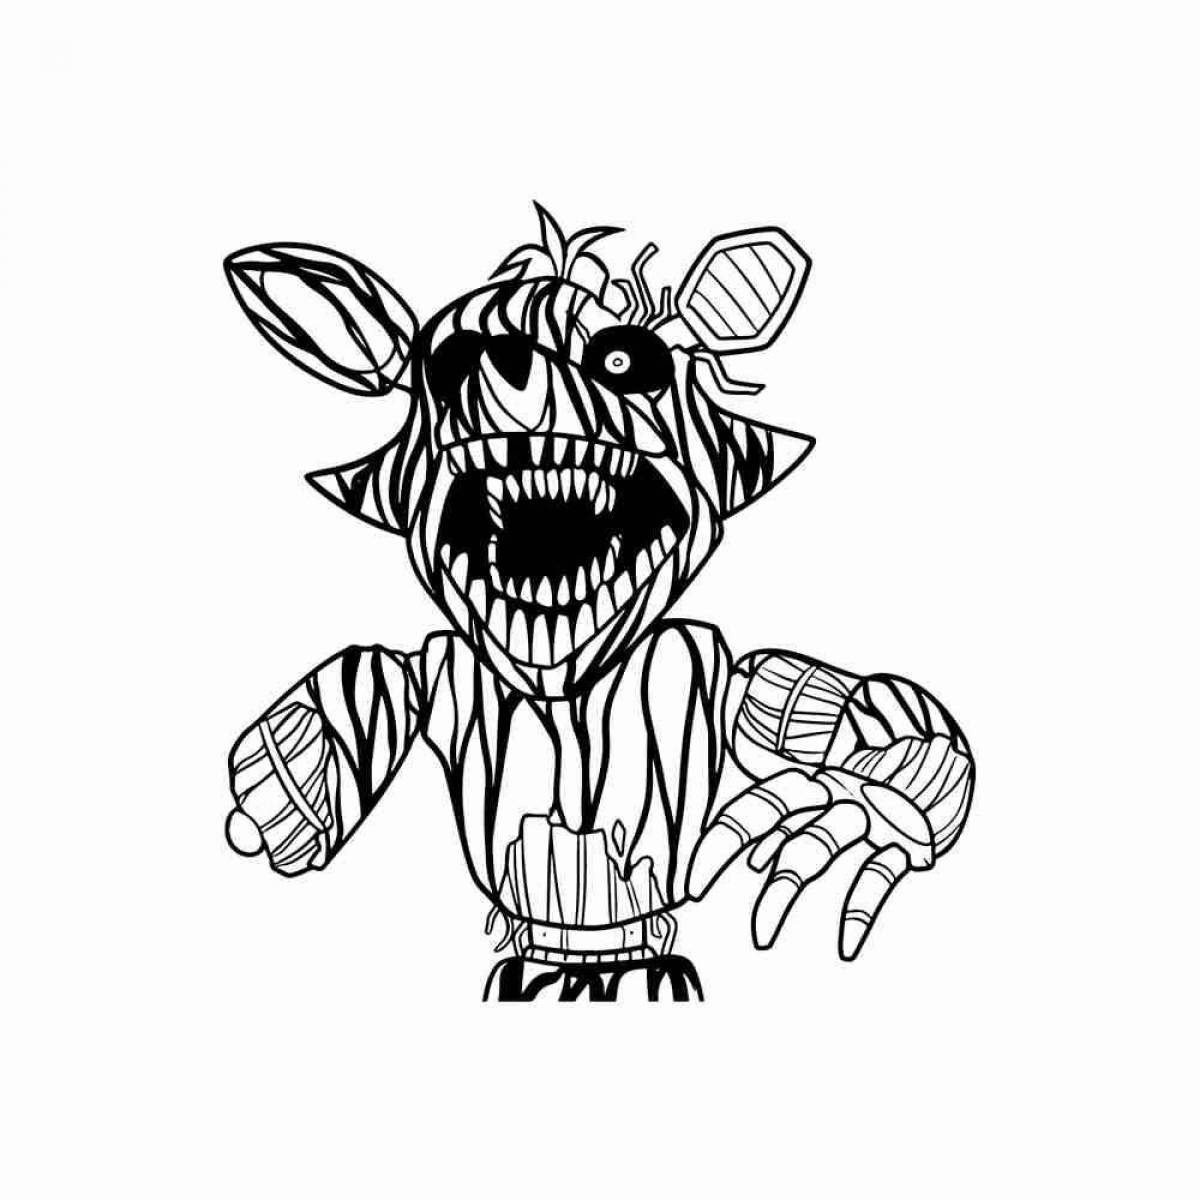 Amazing fnaf 3 coloring page